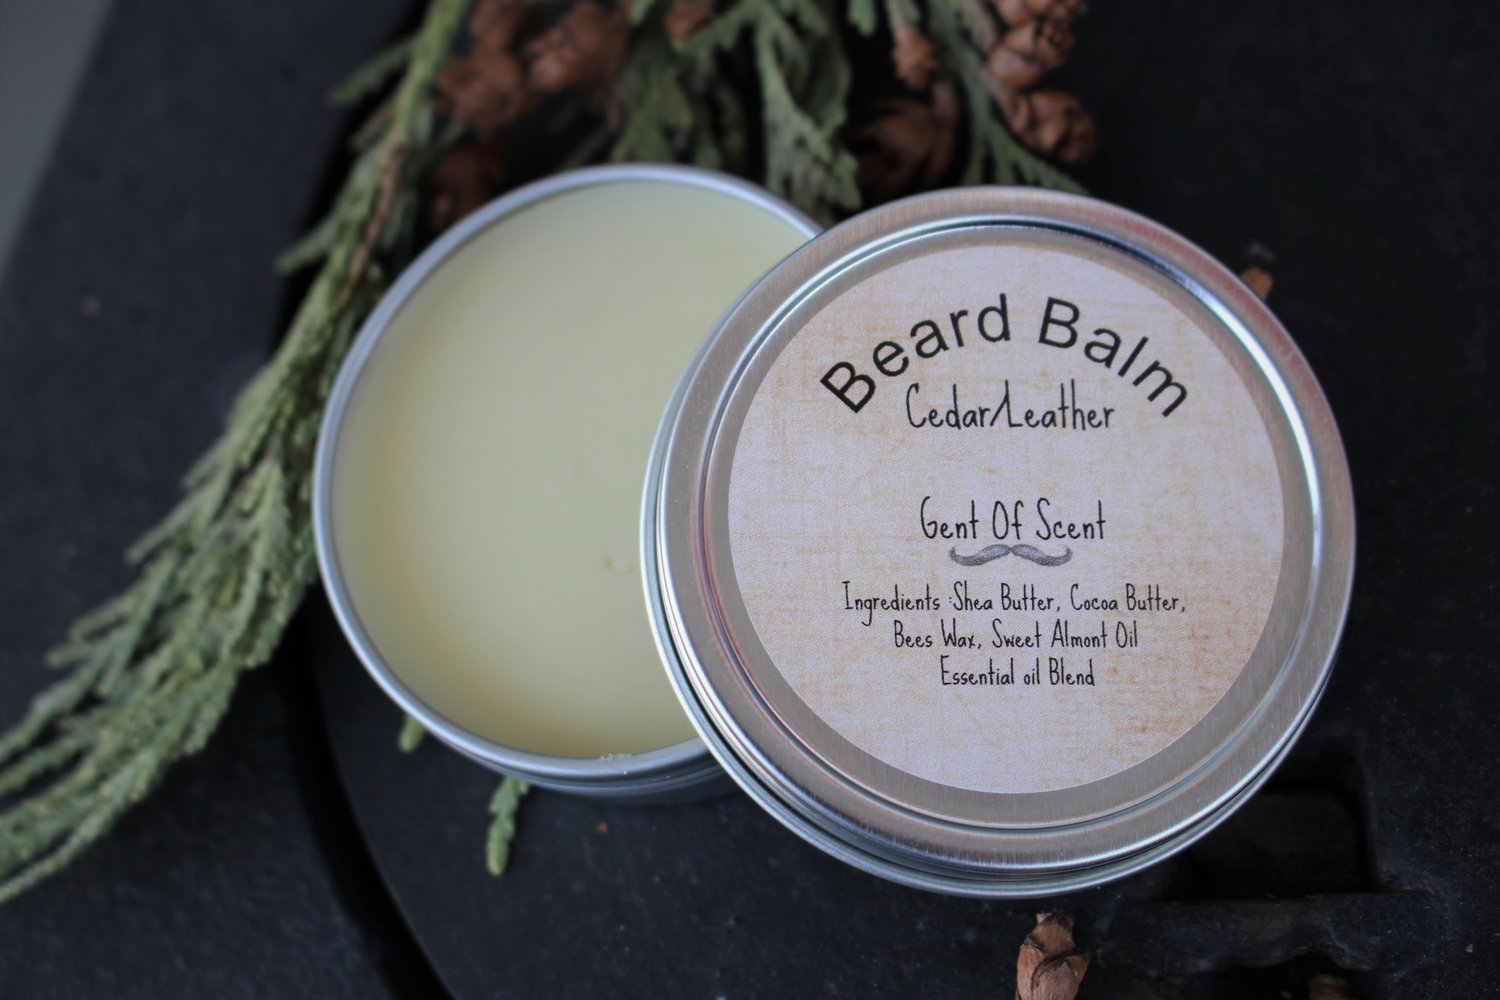 Cedar Leather Essential Oil Based Lotion — The Gent of Scent